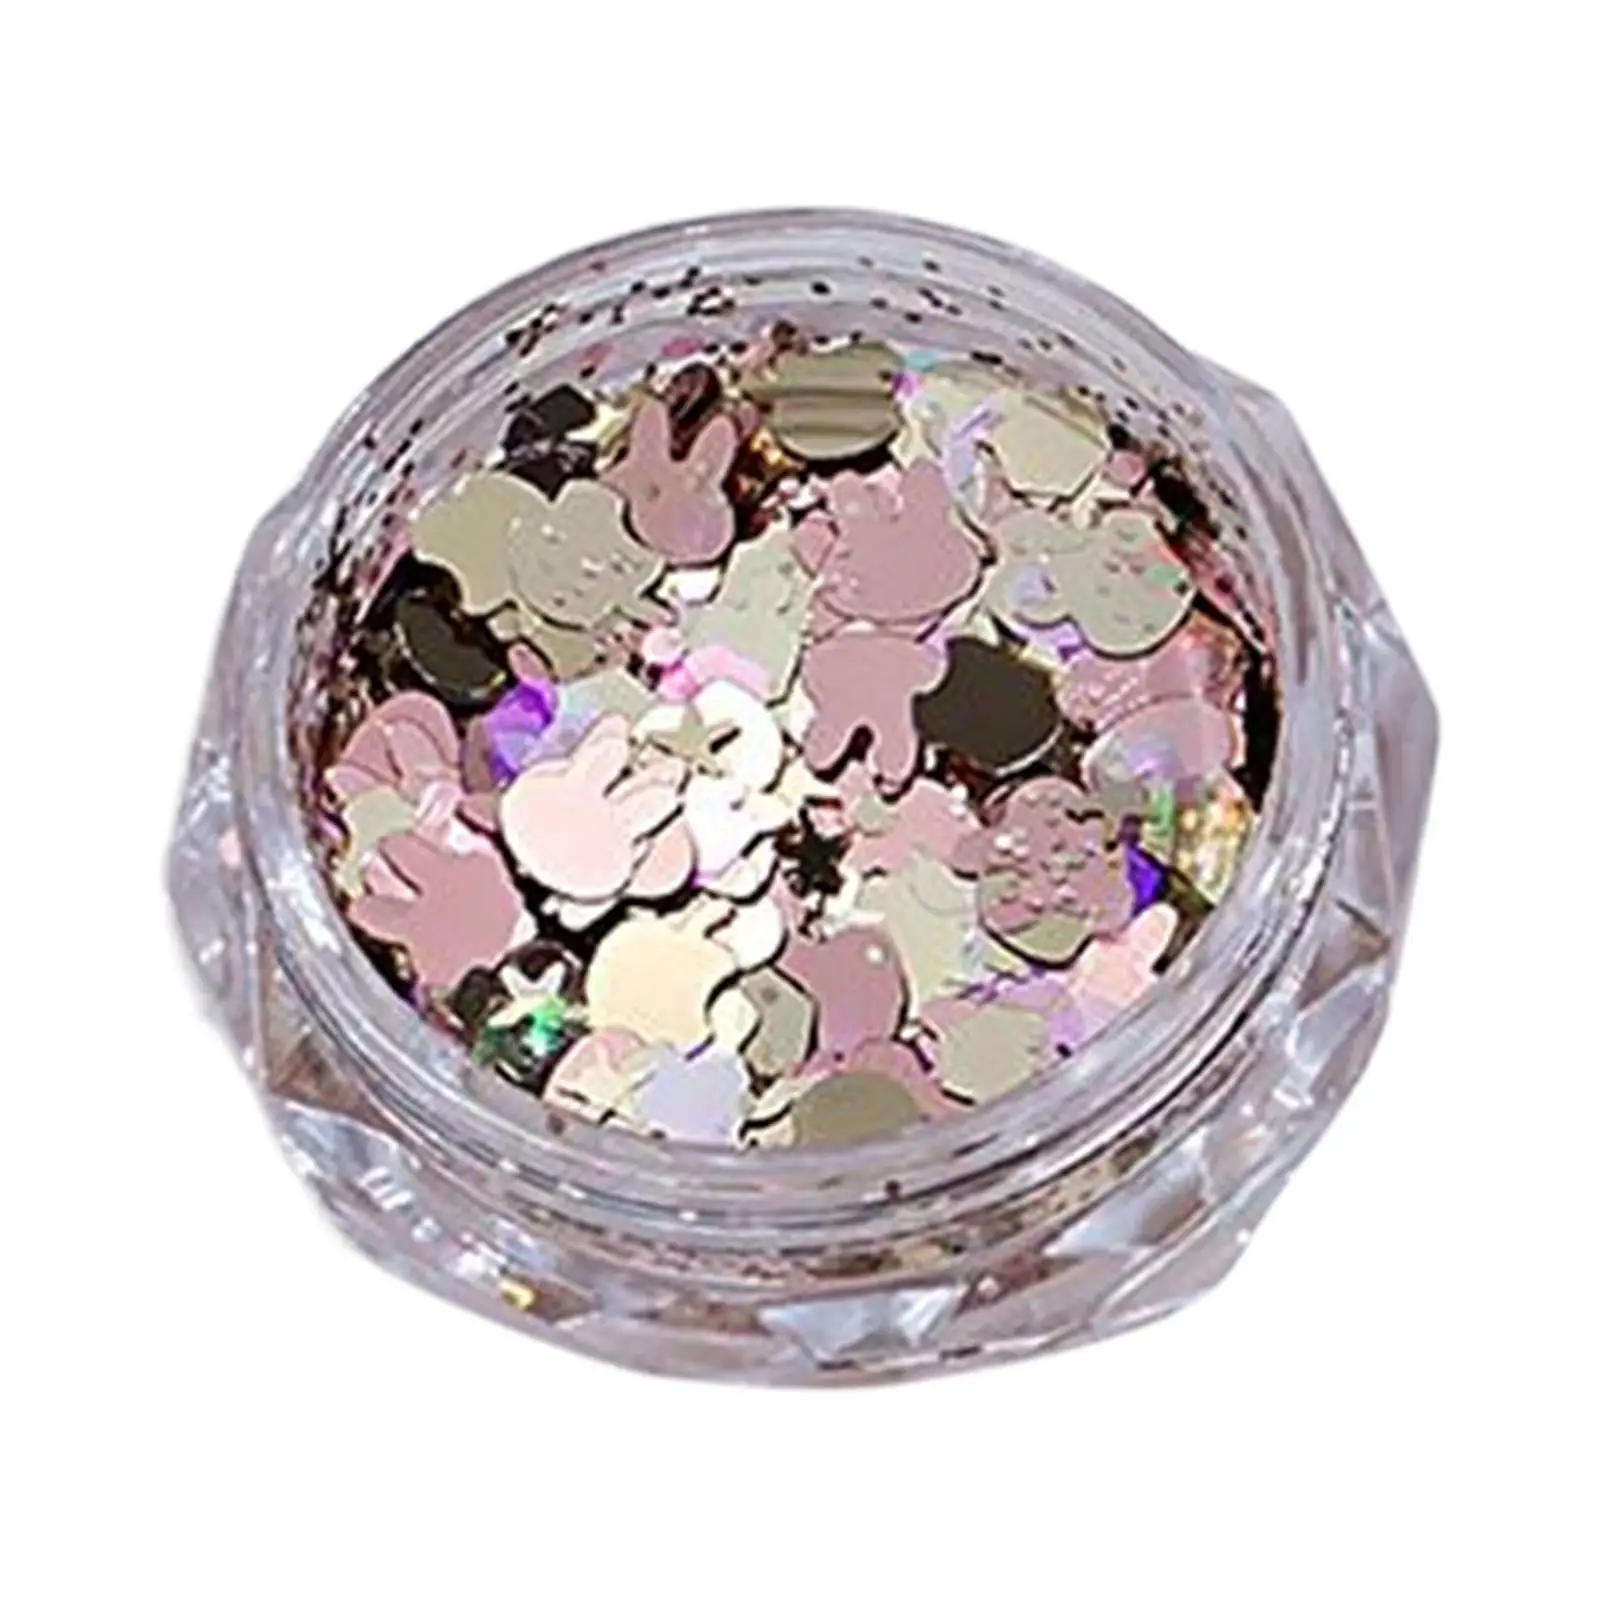 Shining Nail Glitter Sequins Nail Art Women Girls Bright Flakes for Holiday Makeup Craftwork Party Fashion Show Phone Cases